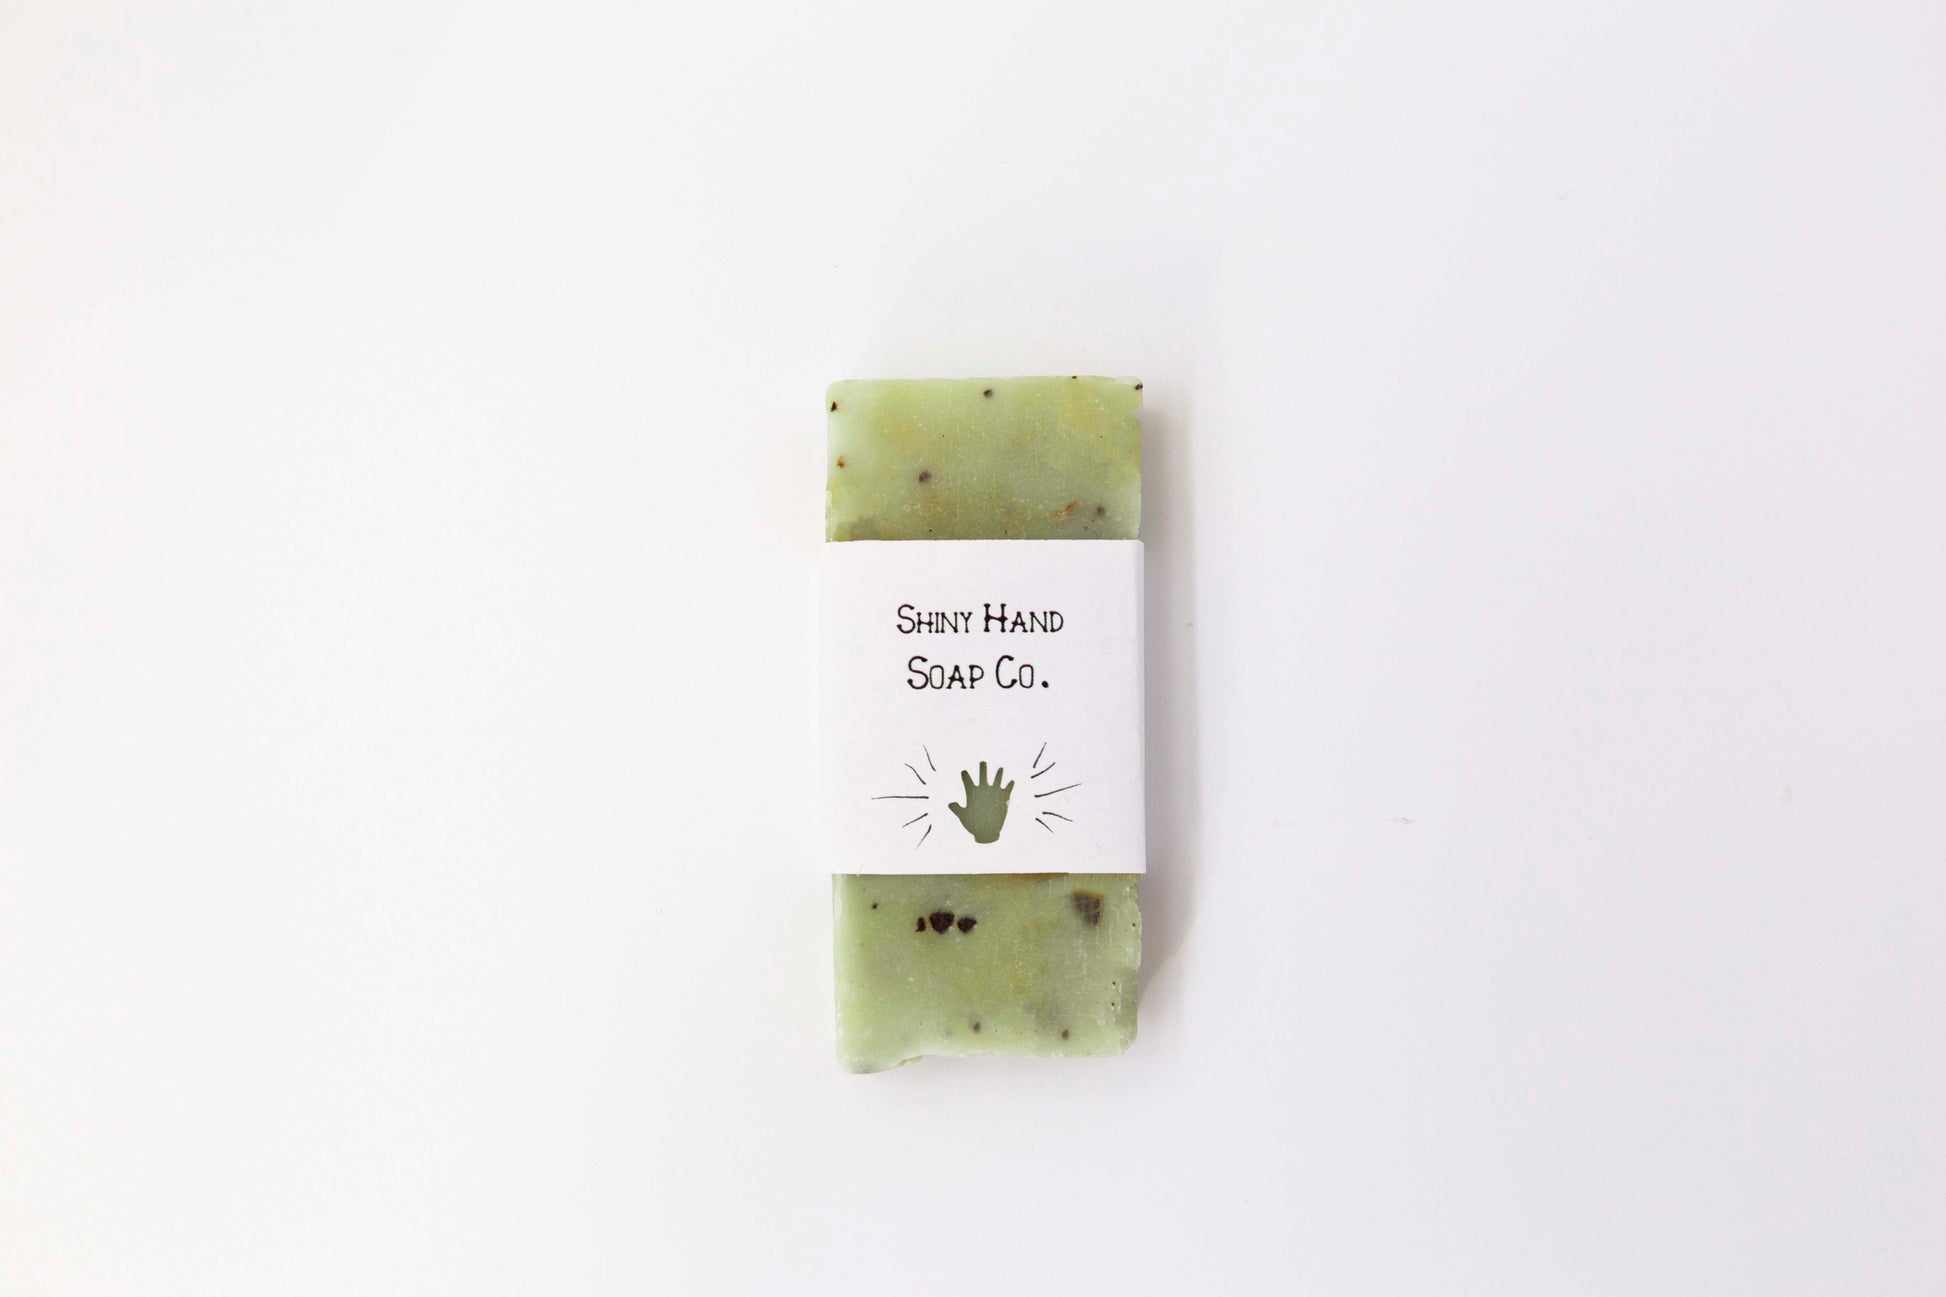 A miniature pale green basil mint soap flecked with crushed coffee beans sits on a clean white background wrapped in a small paper wrapper with a hand cut out of it.